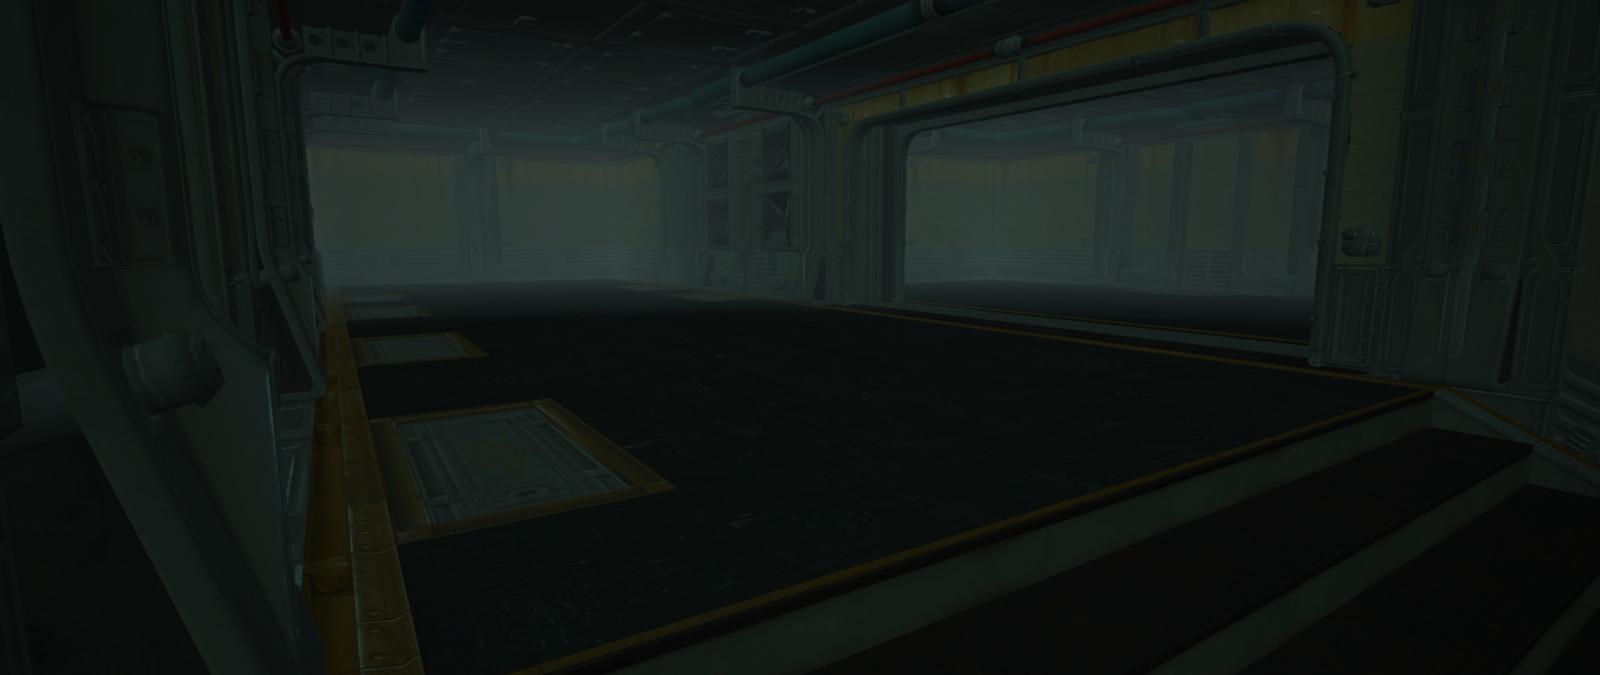 [wip] A S I A Orbital Station Sexbots In Space Fallout 4 Adult Mods Loverslab